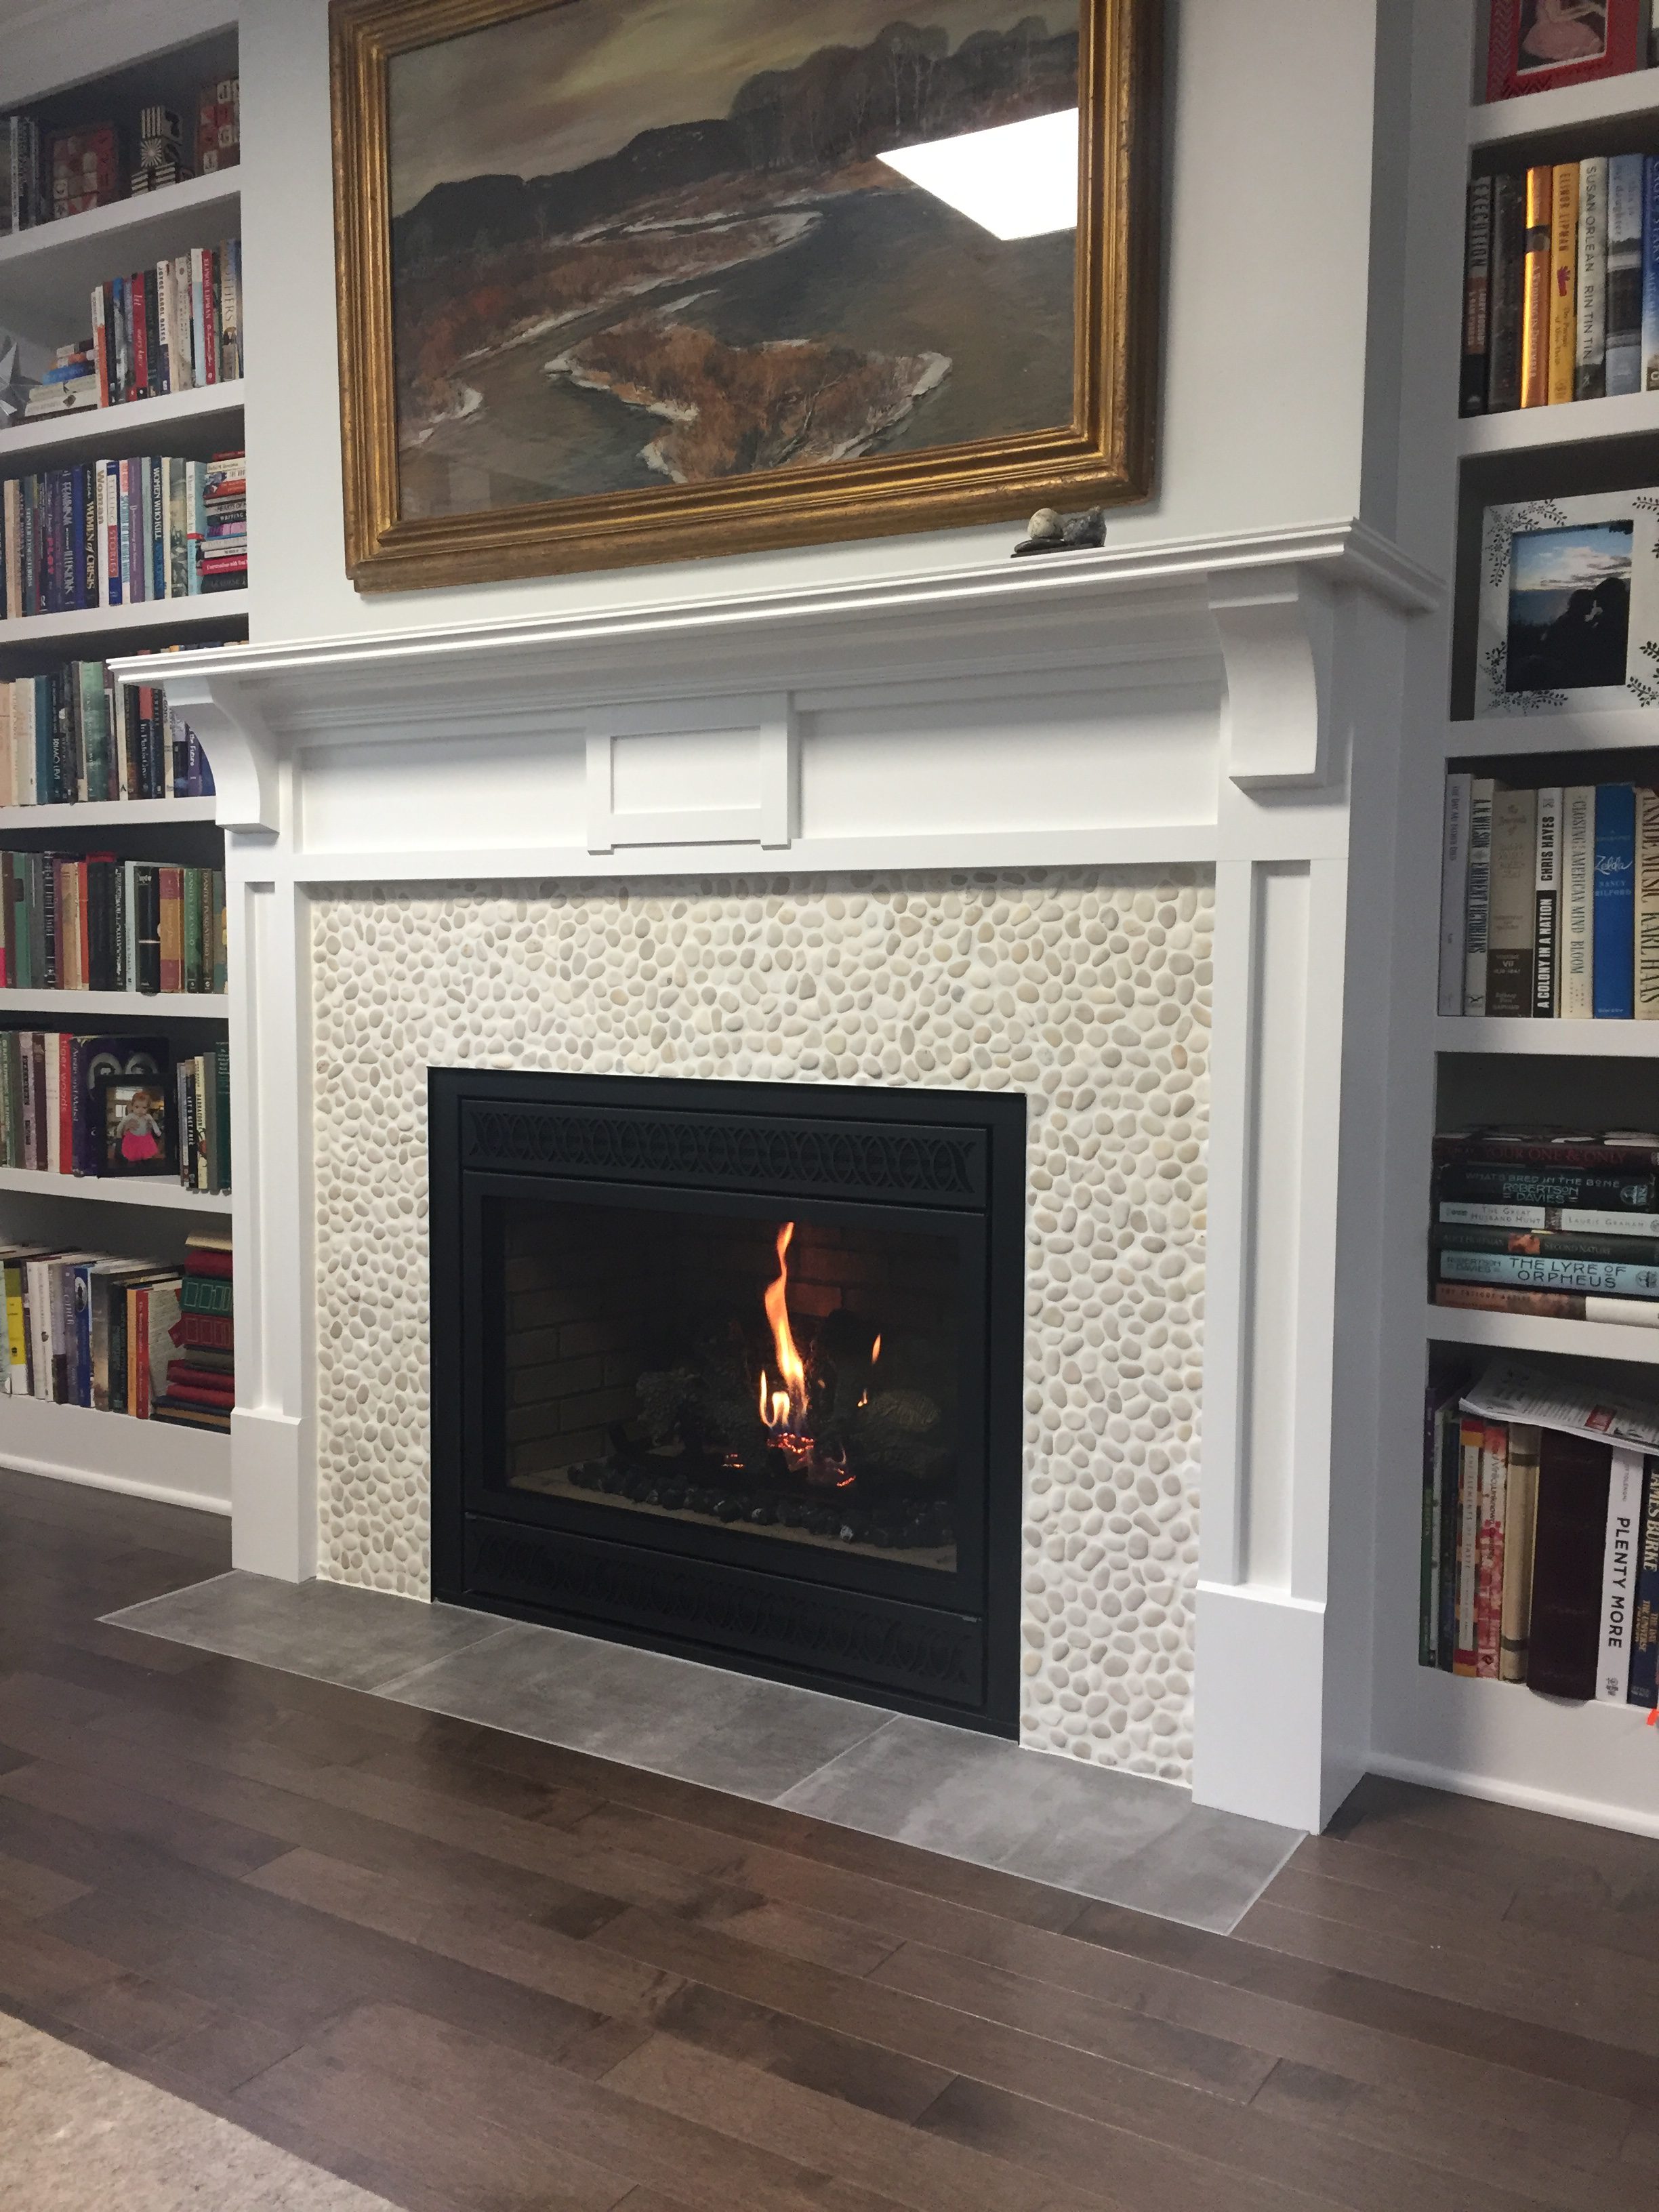 Image of a traditional 564 SpaceSaver gas fireplace by Fireplace X featuring traditional tile facing and mantle.